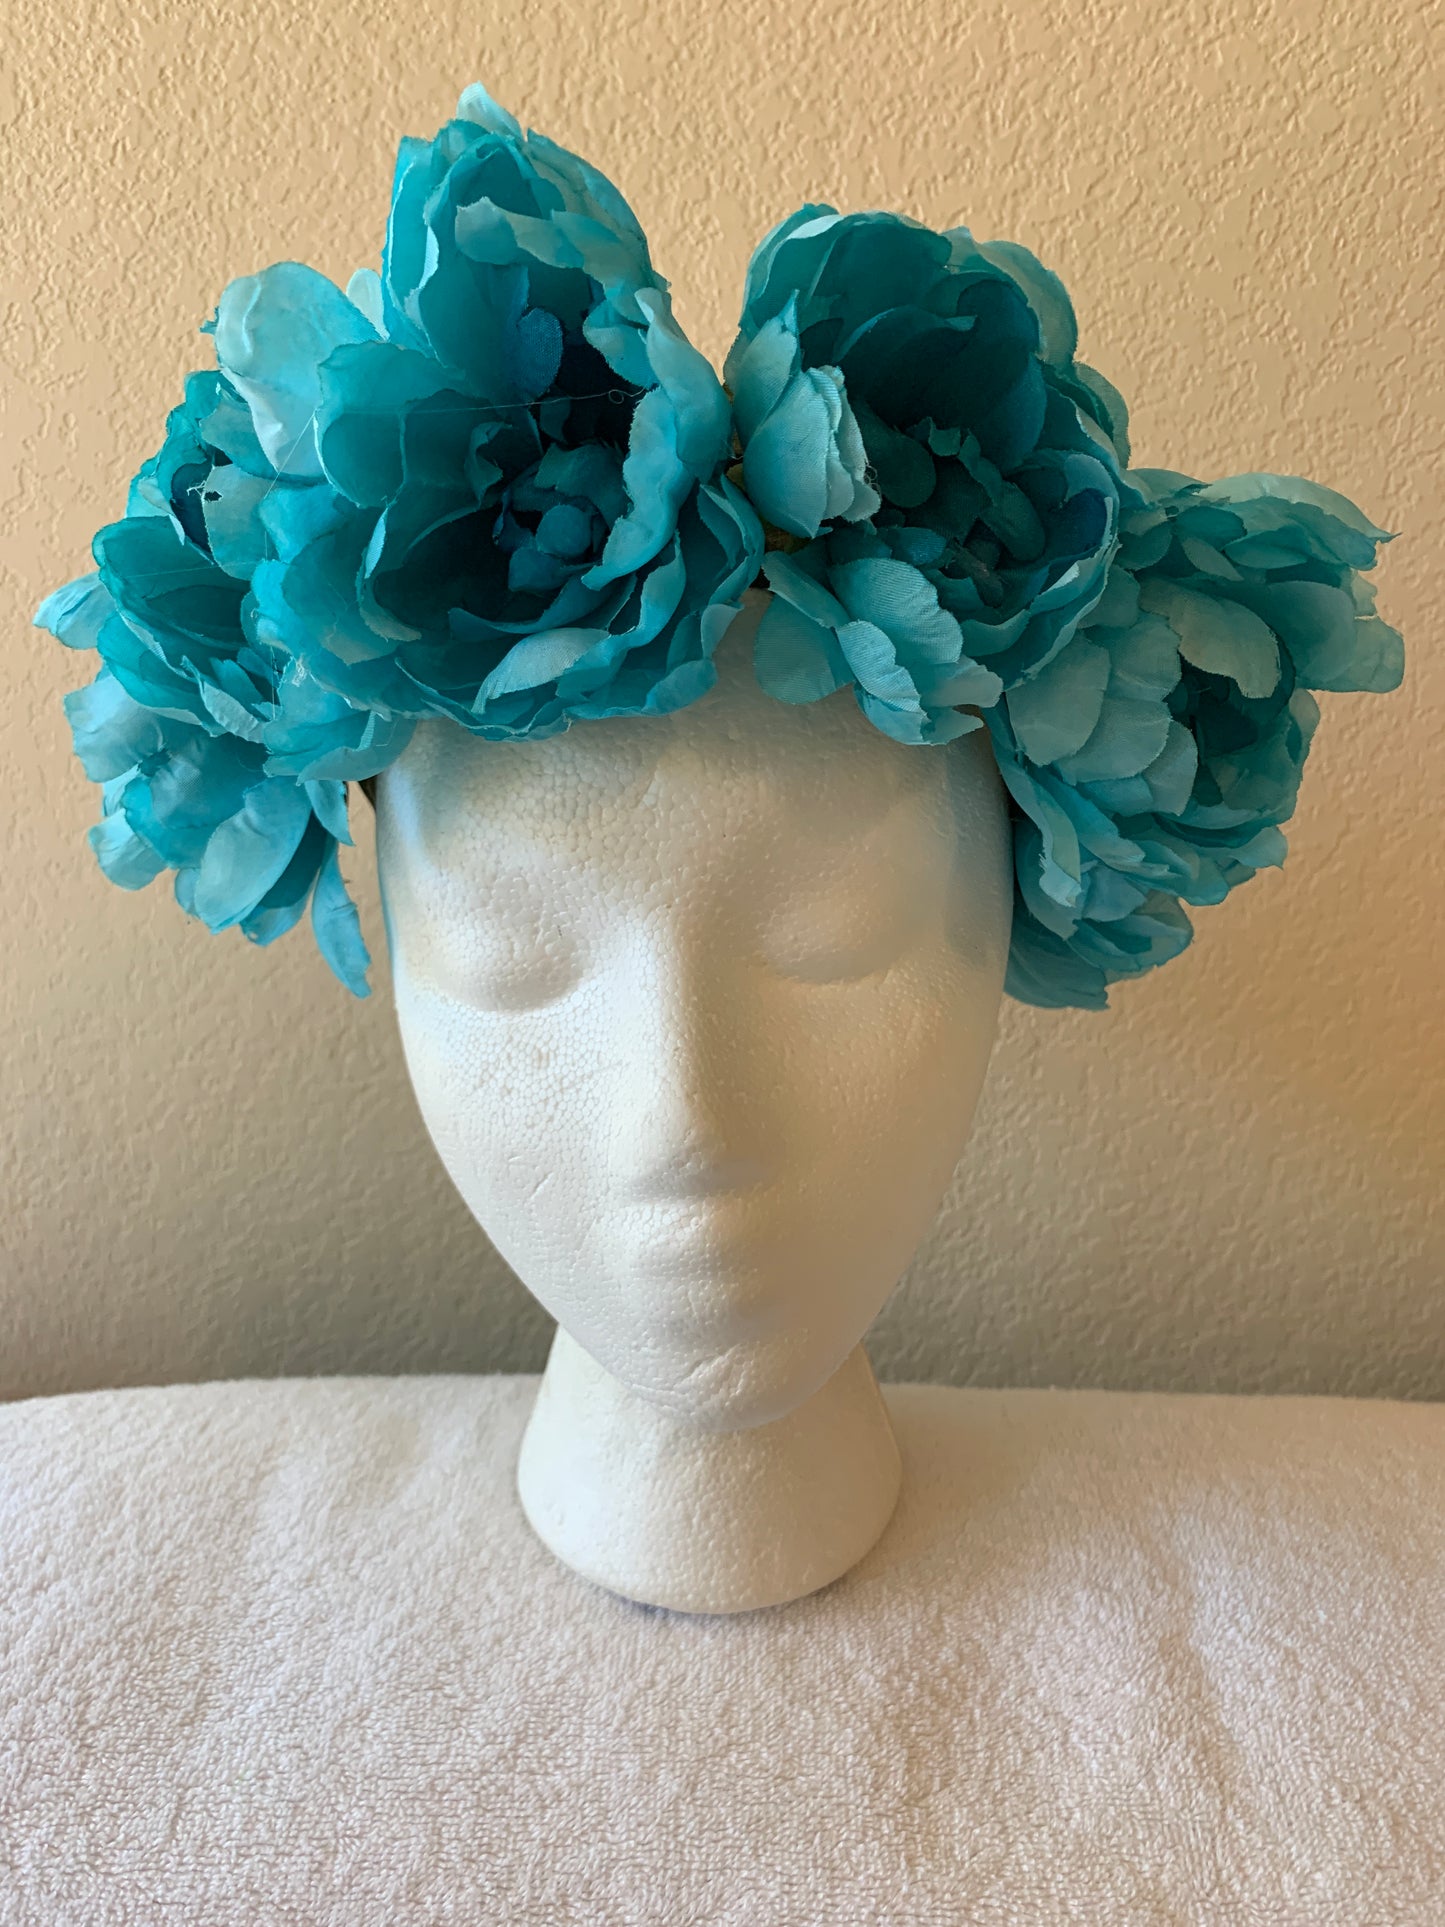 Large Wreath - All Teal Flowers